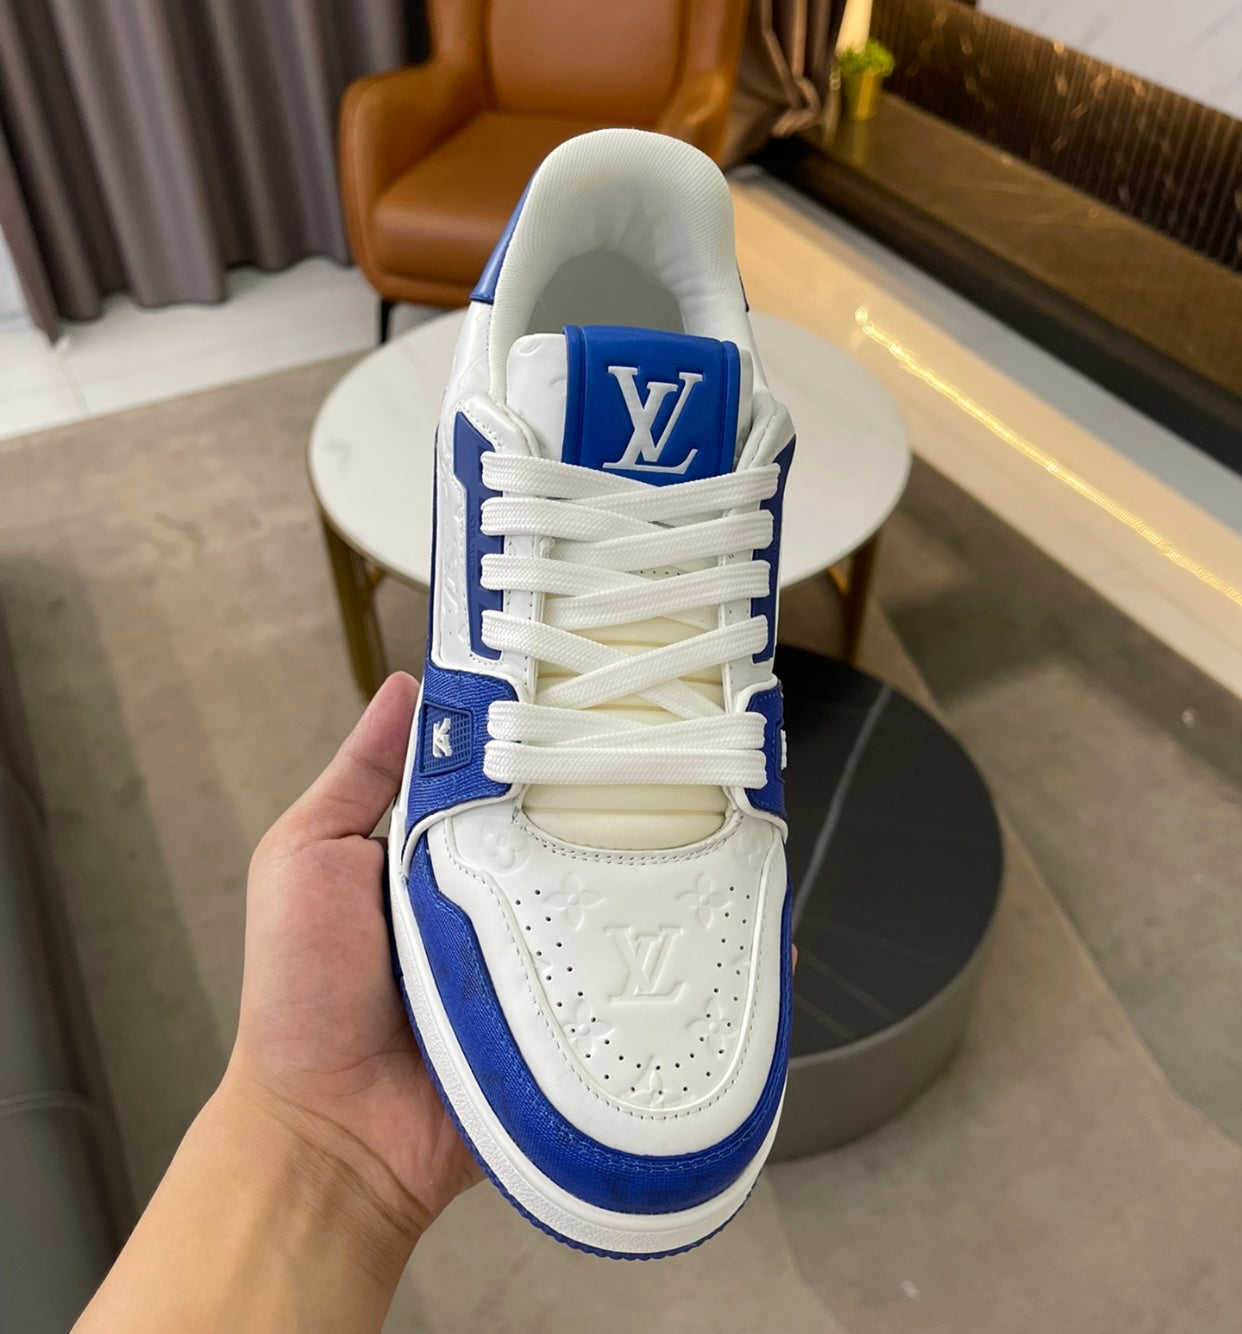 red lv trainer sneaker